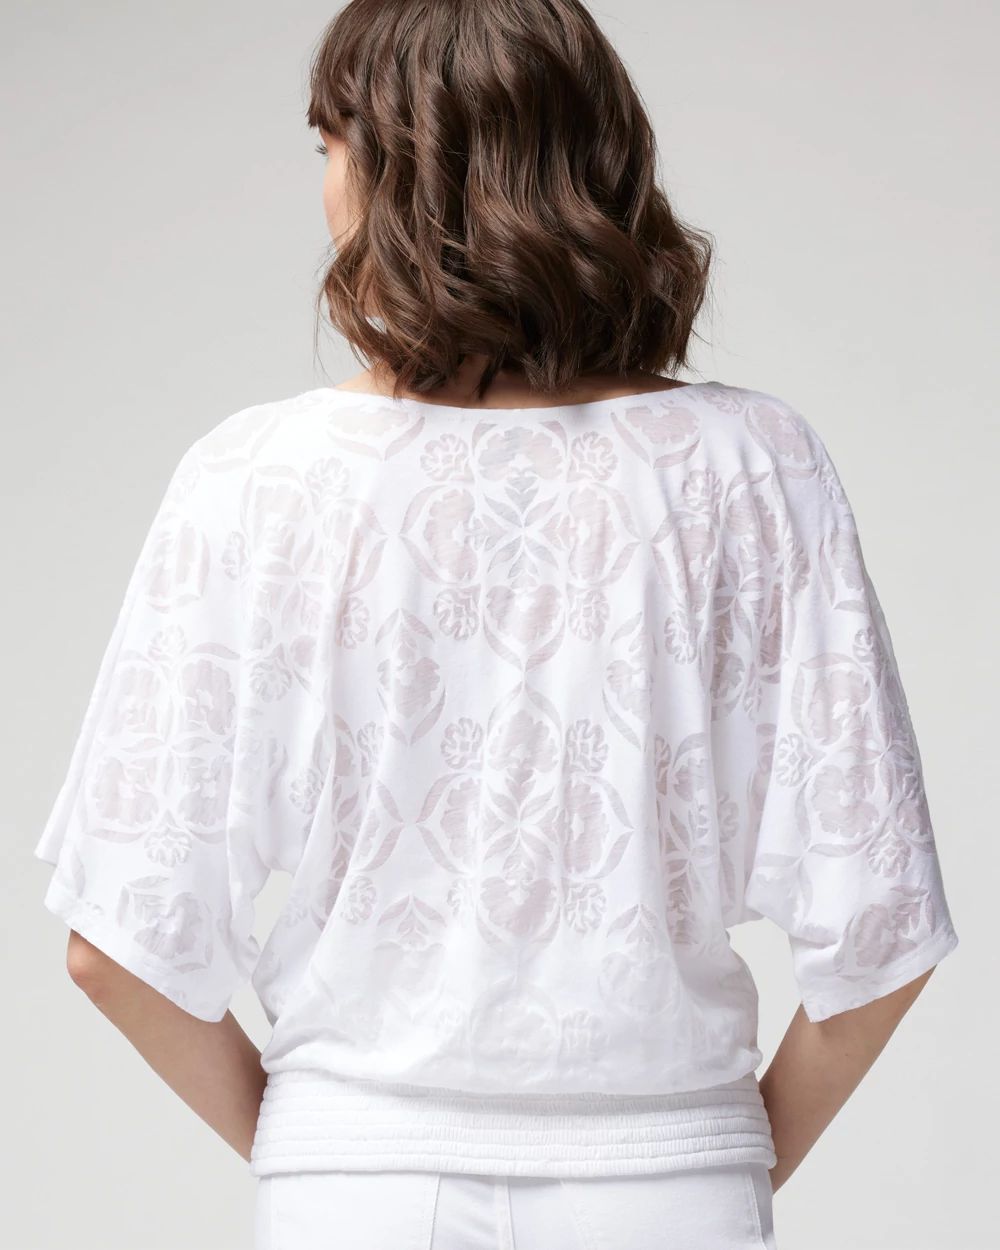 Short-Sleeve Kimono Top click to view larger image.